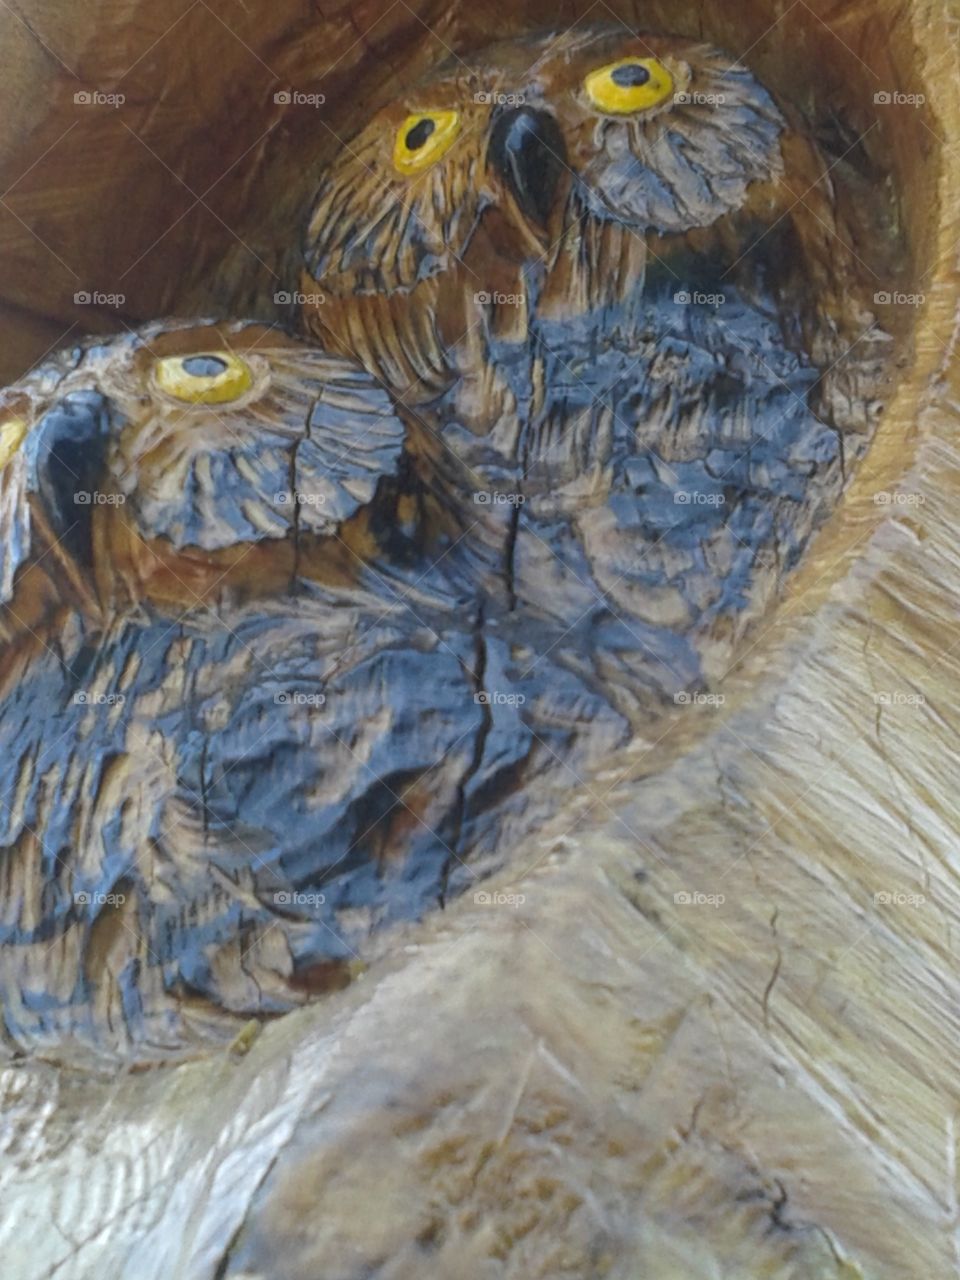 Carving in tree trunk. These owls are part of a trunk sculpture that an old woman was retouching.